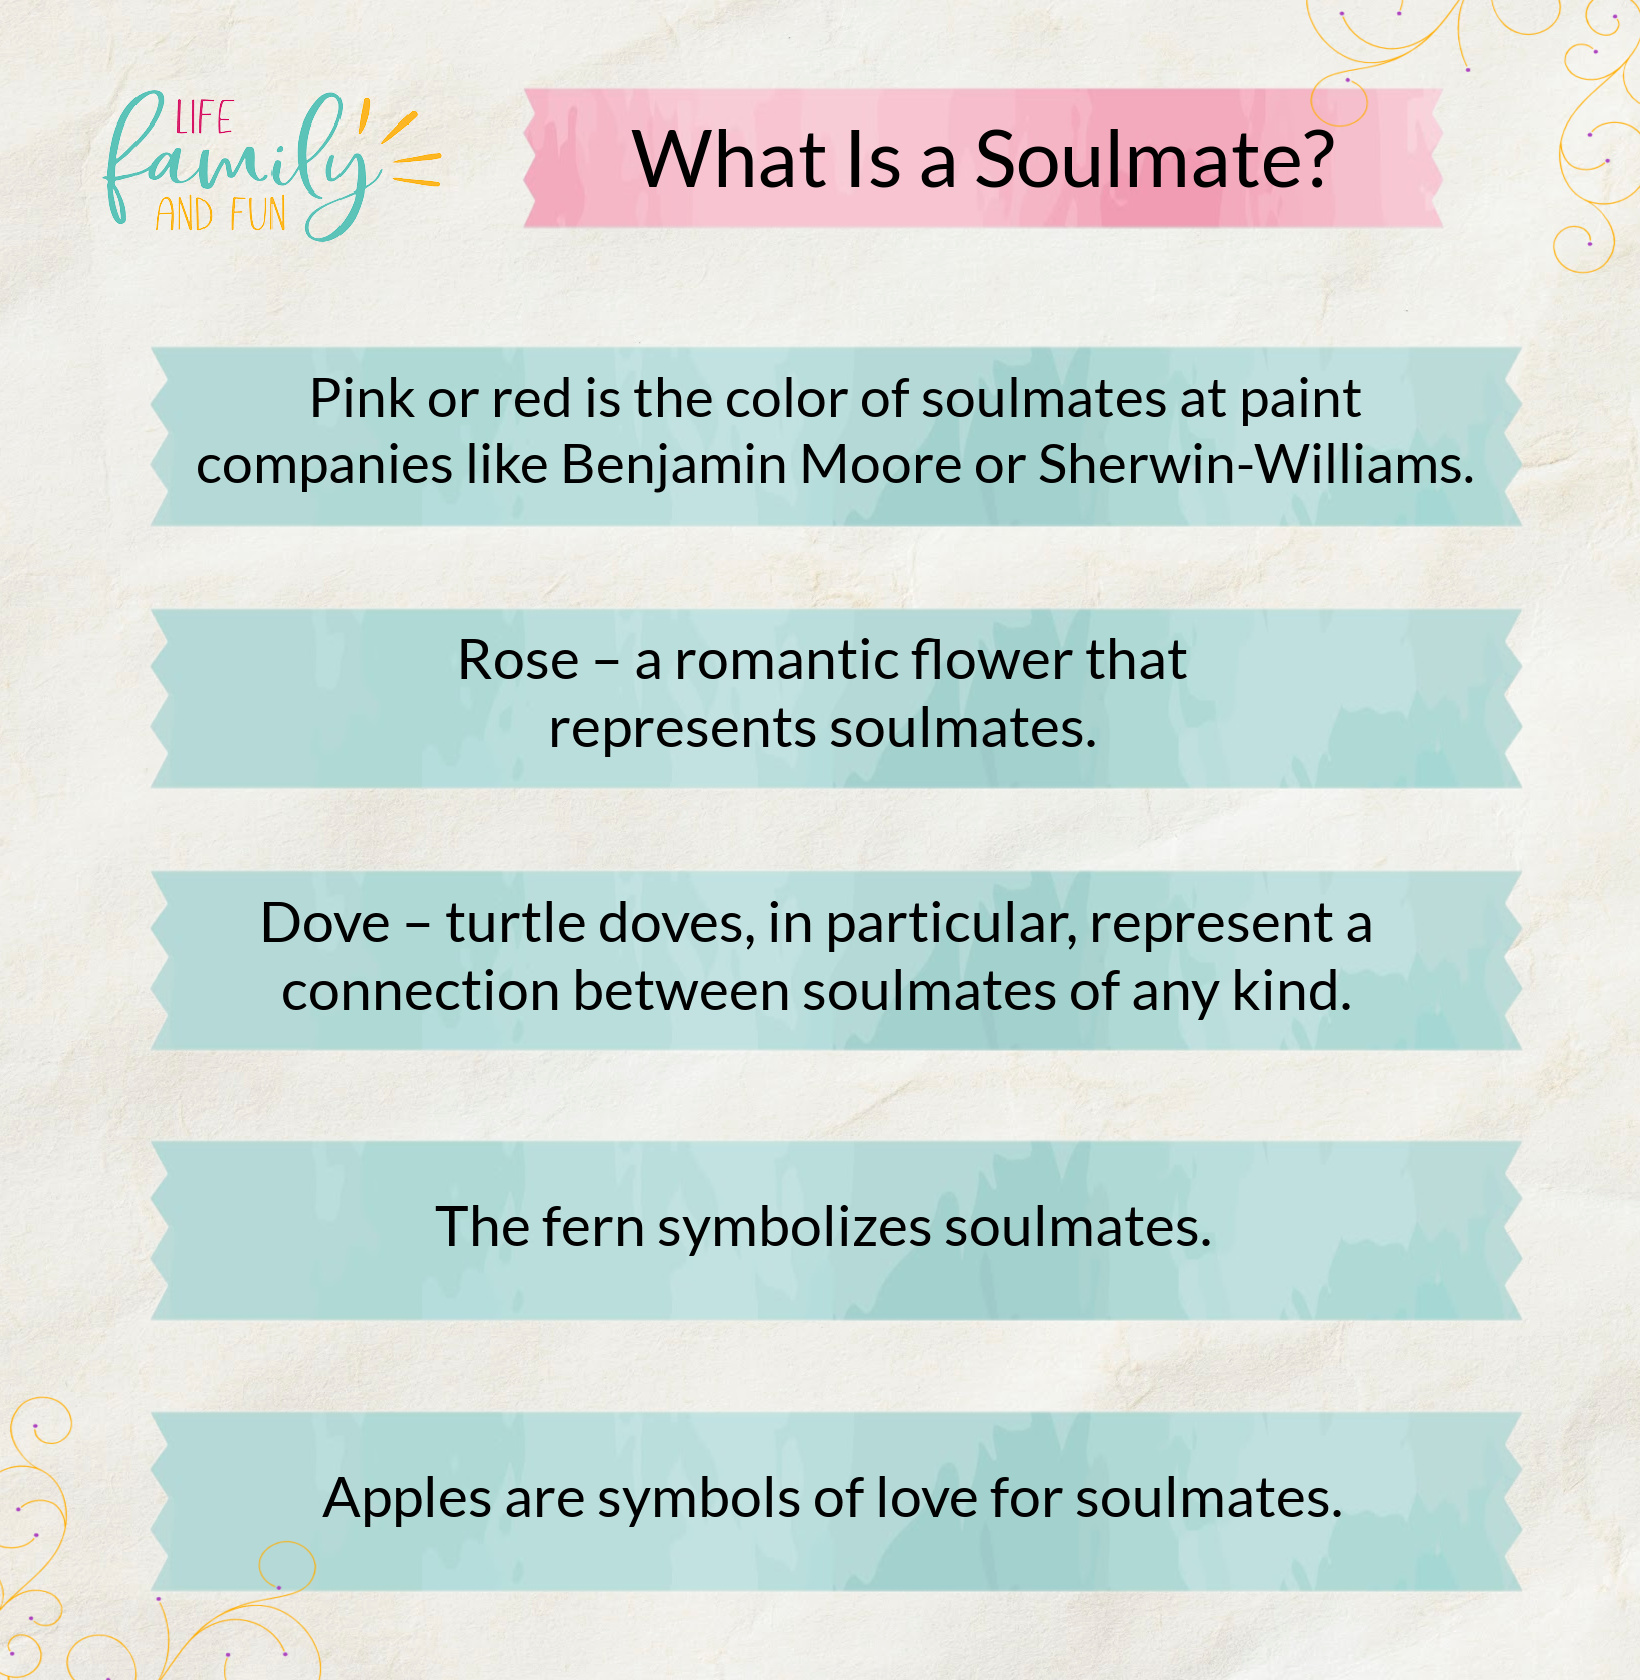 What Is a Soulmate?